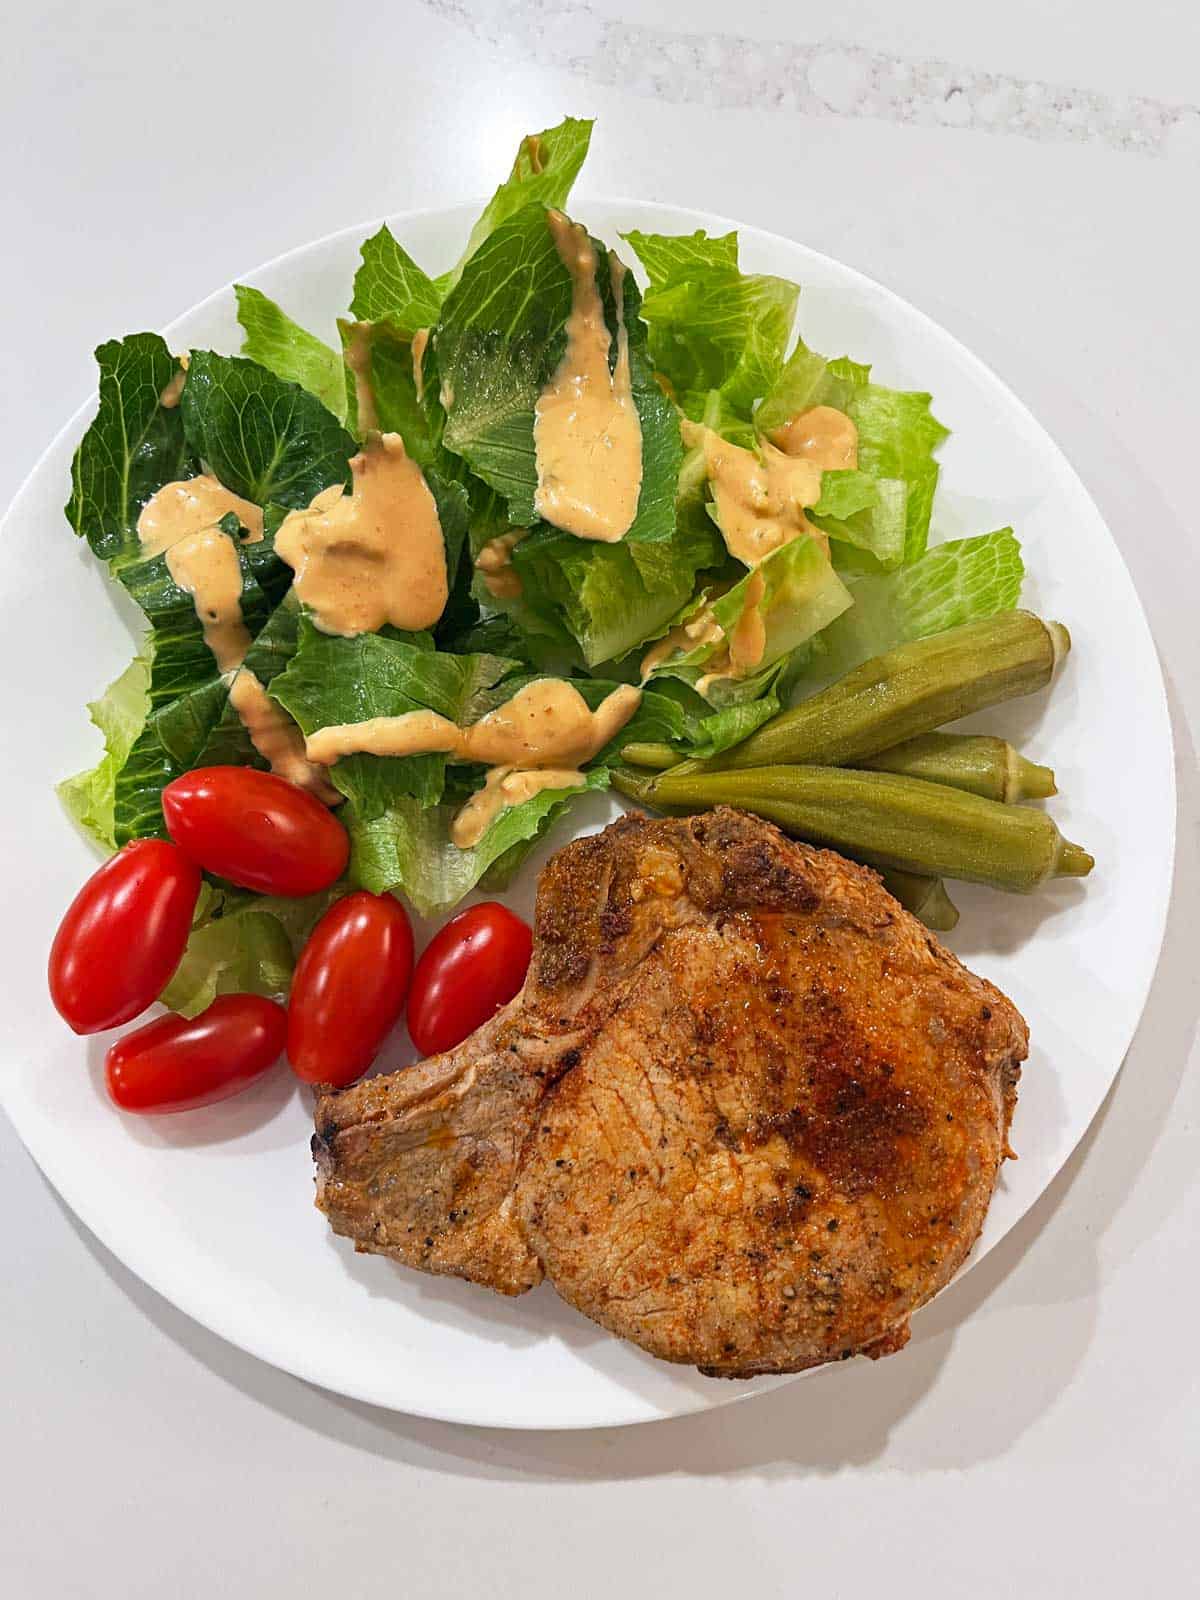 A leftover pork chop is served with a simple side salad.